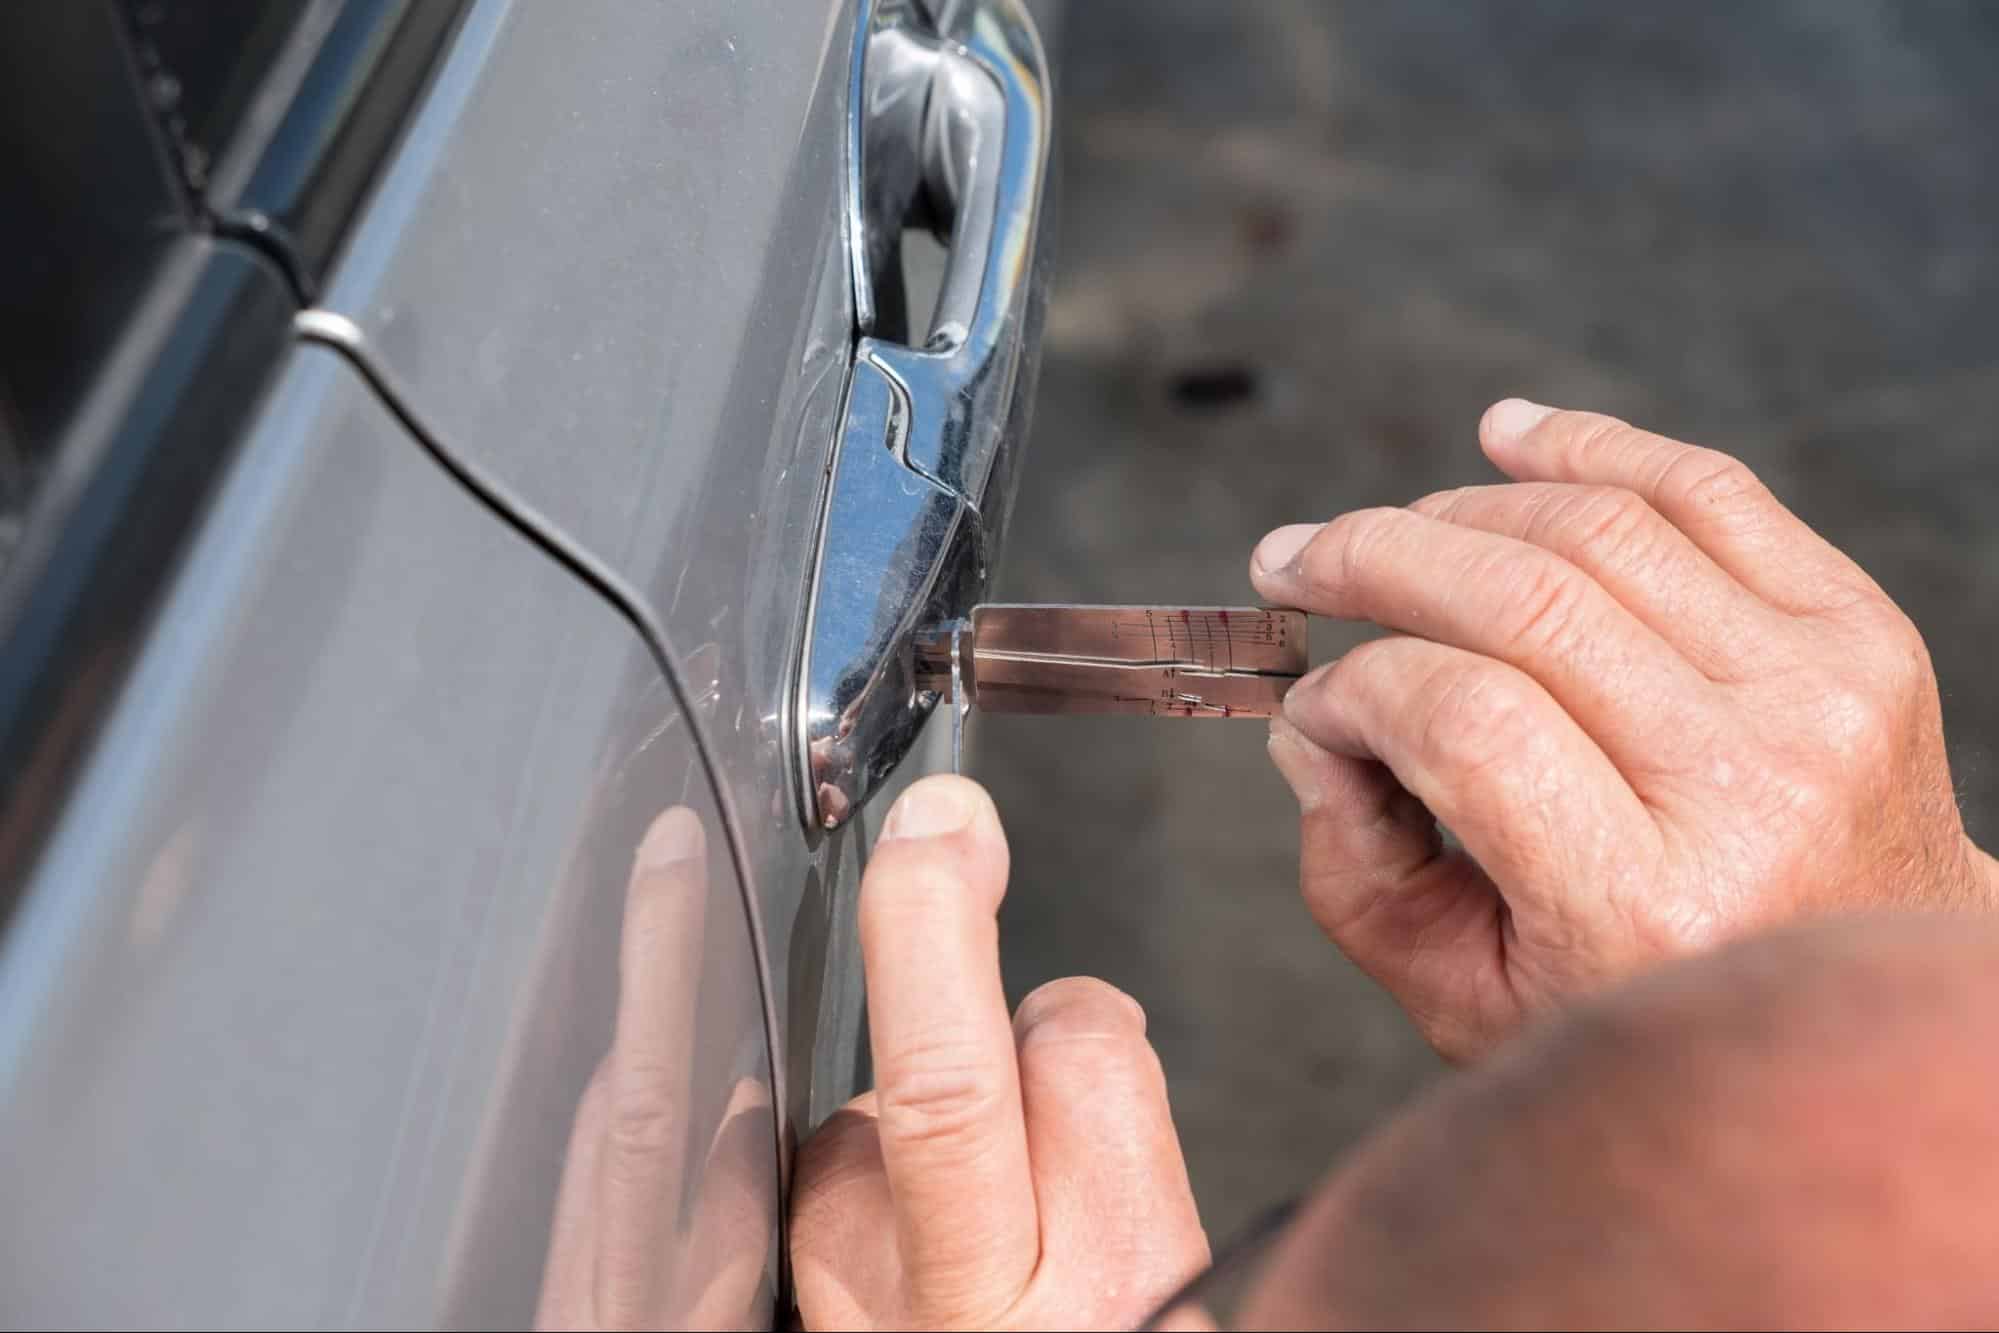 Unlocking a car by picking the door lock